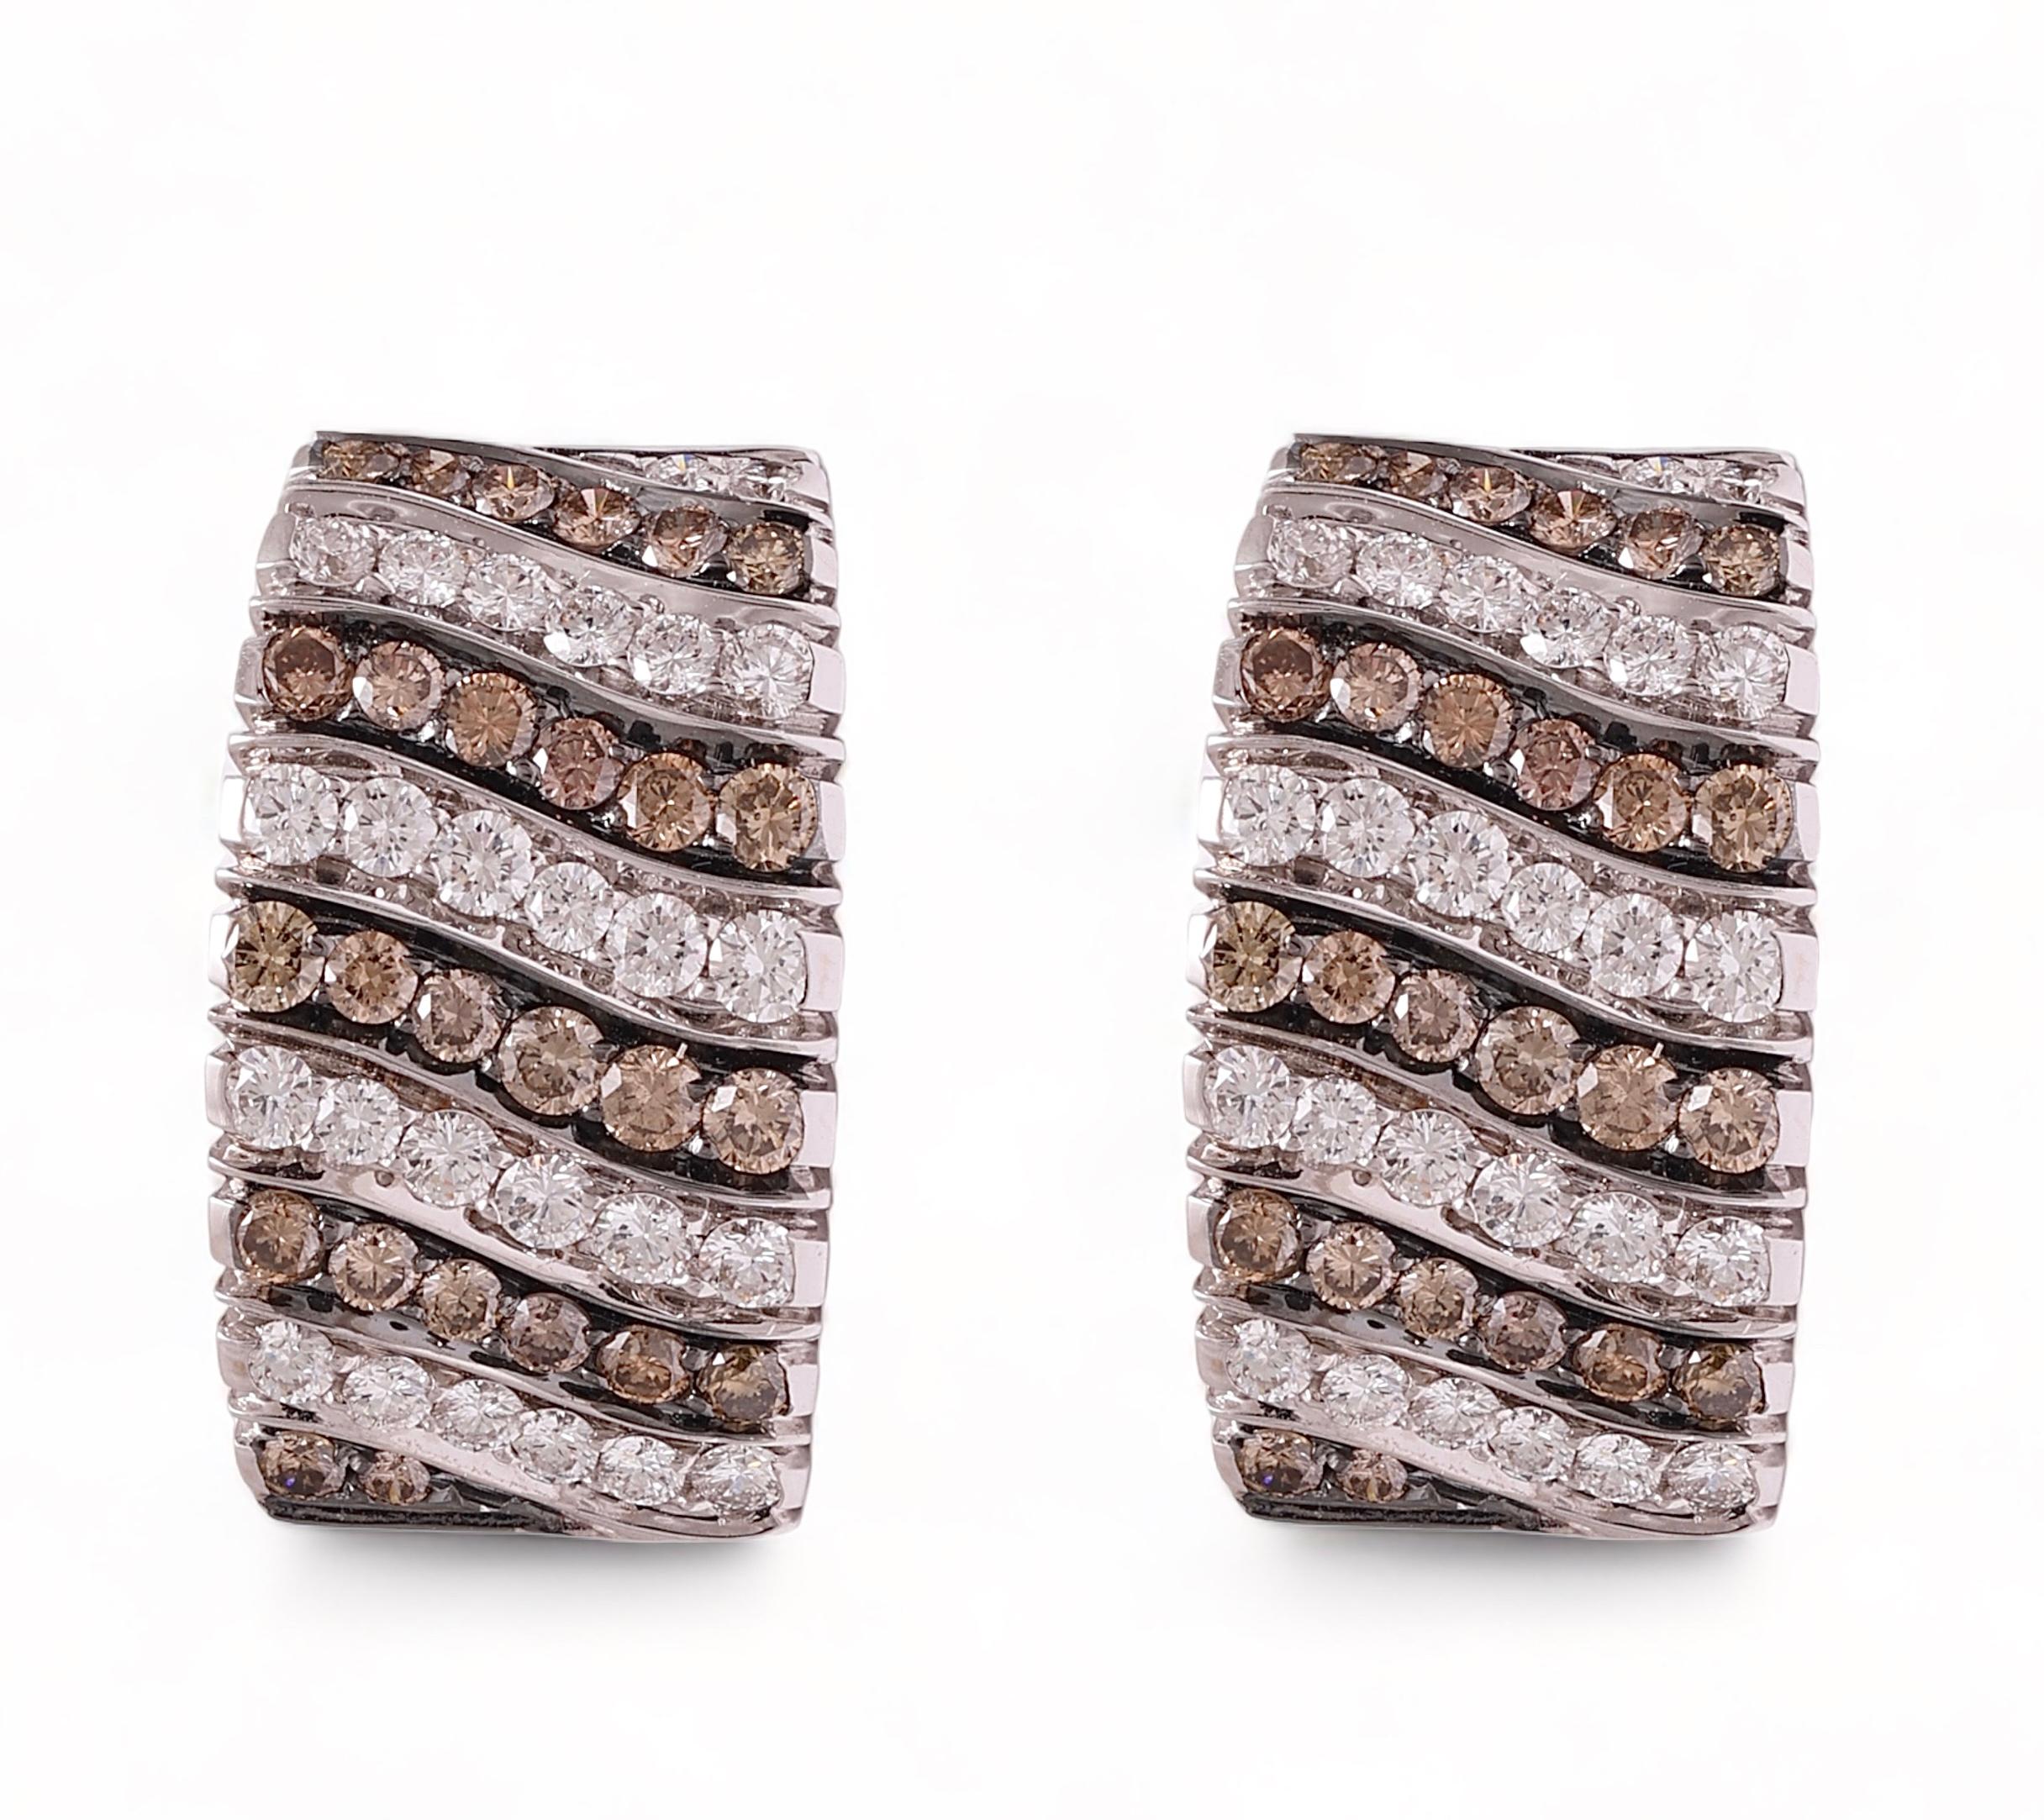 Damaso Martinez 18 kt. White Gold Clip-on Earrings With 4.16 ct. Cognac and White Diamonds

Earrings has a stick that goes up and down, so can conveniently enough be used for either - pierced or unpierced ears.

Diamonds: Brilliant cut cognac &